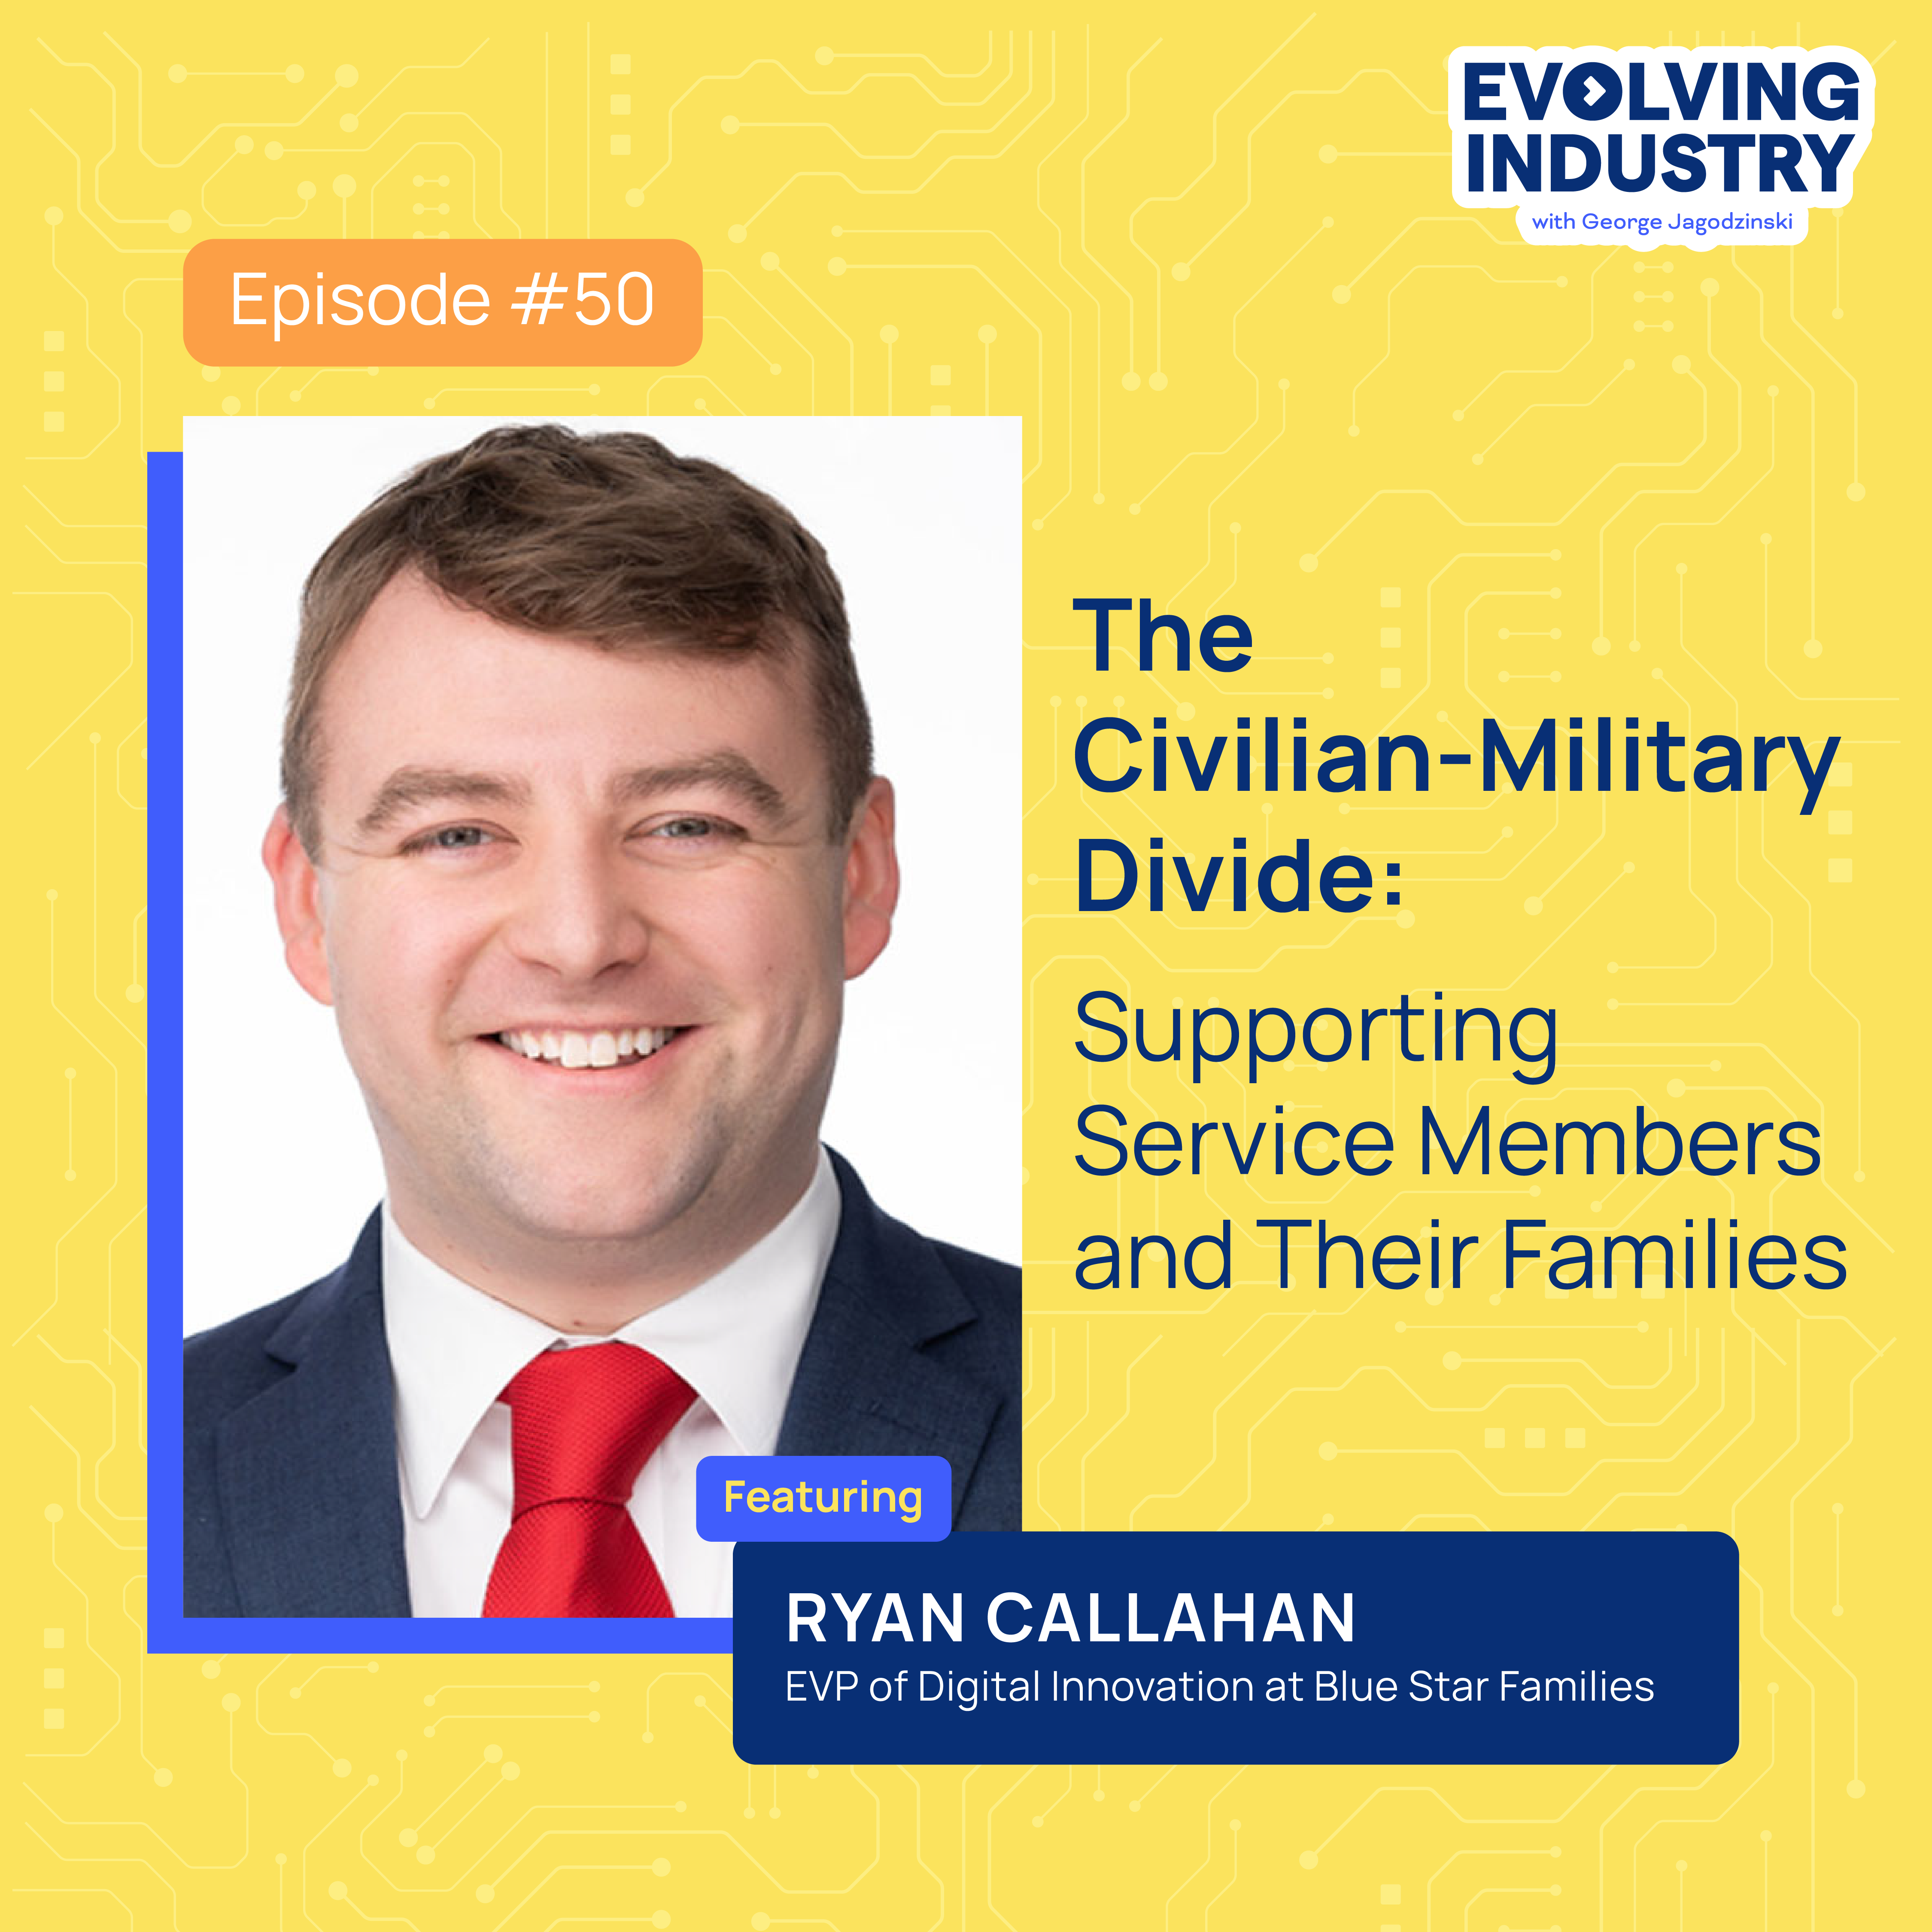 The Civilian-Military Divide: Supporting Service Members and Their Families